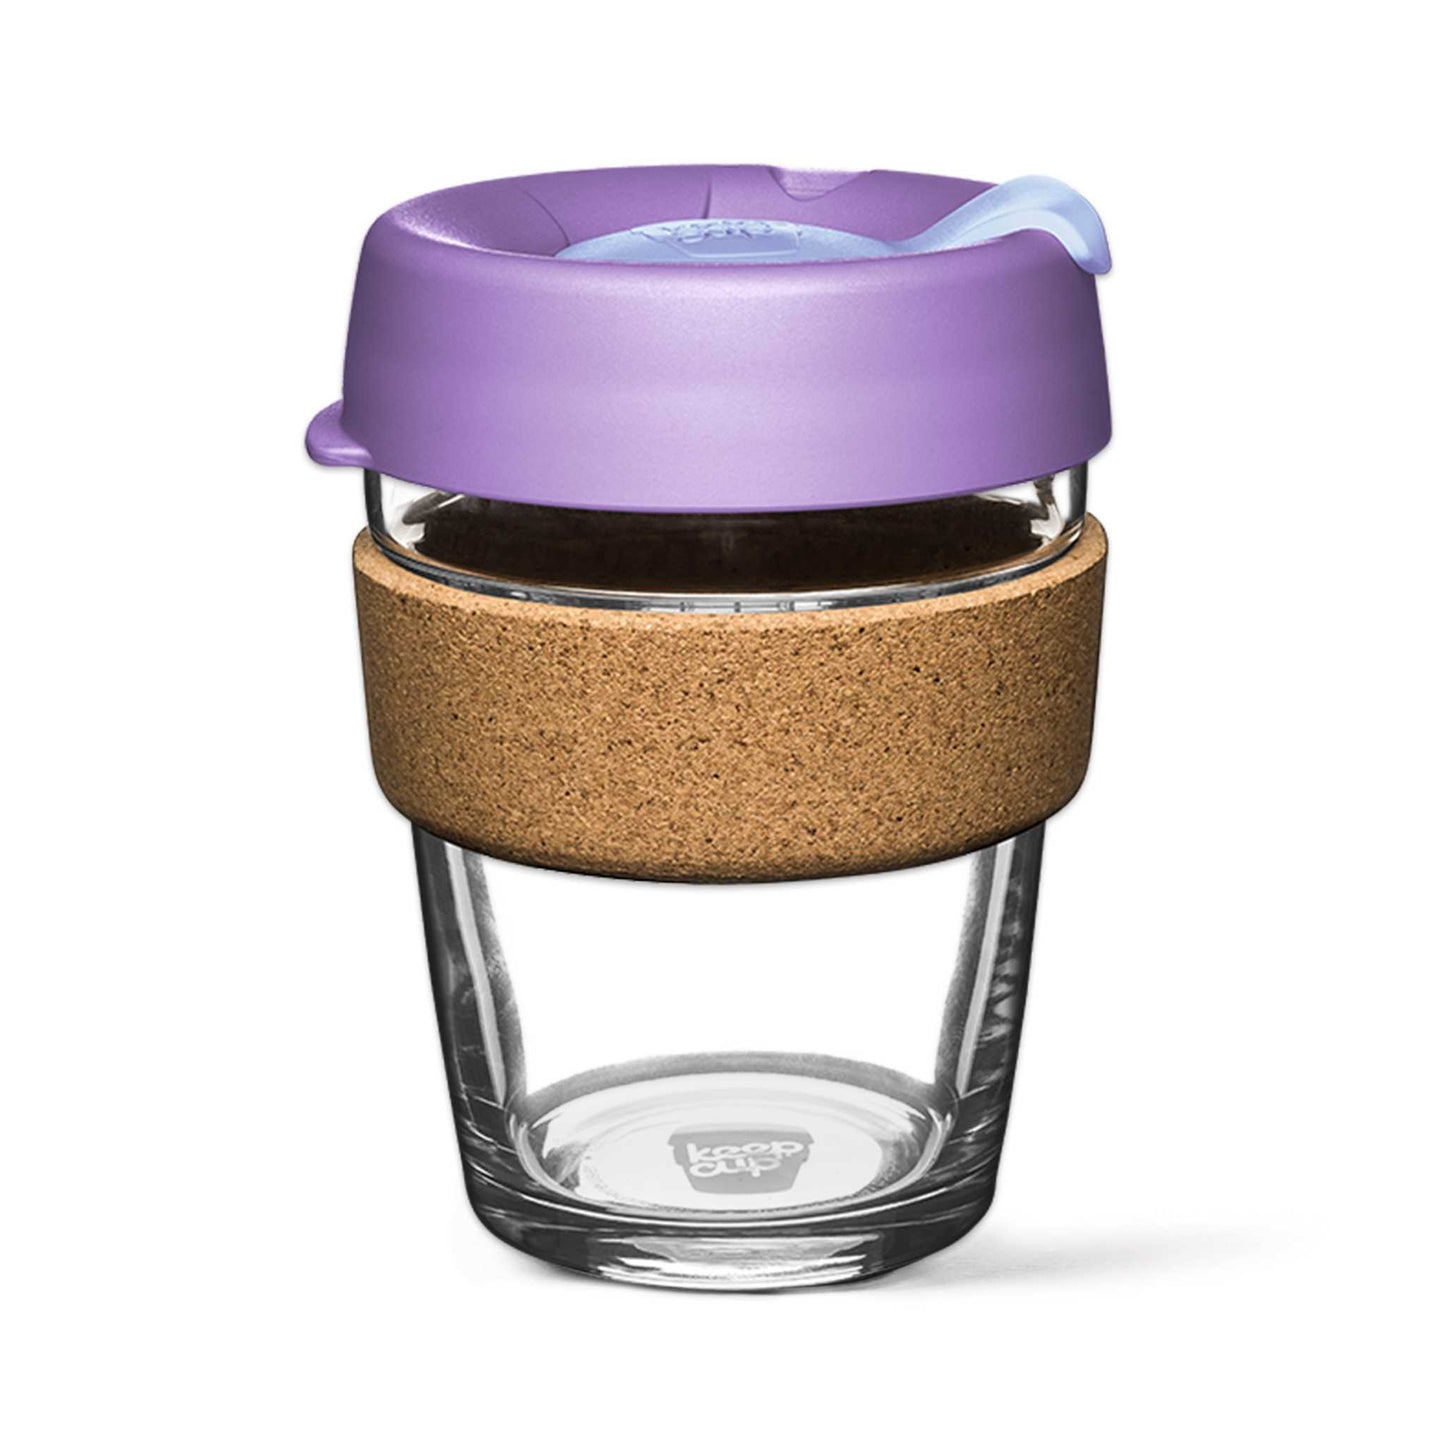 Keepcup Brew Cork Coffee Cups Keepcup Brew 12oz Glass Coffee Cup With Cork Band - Moonlight